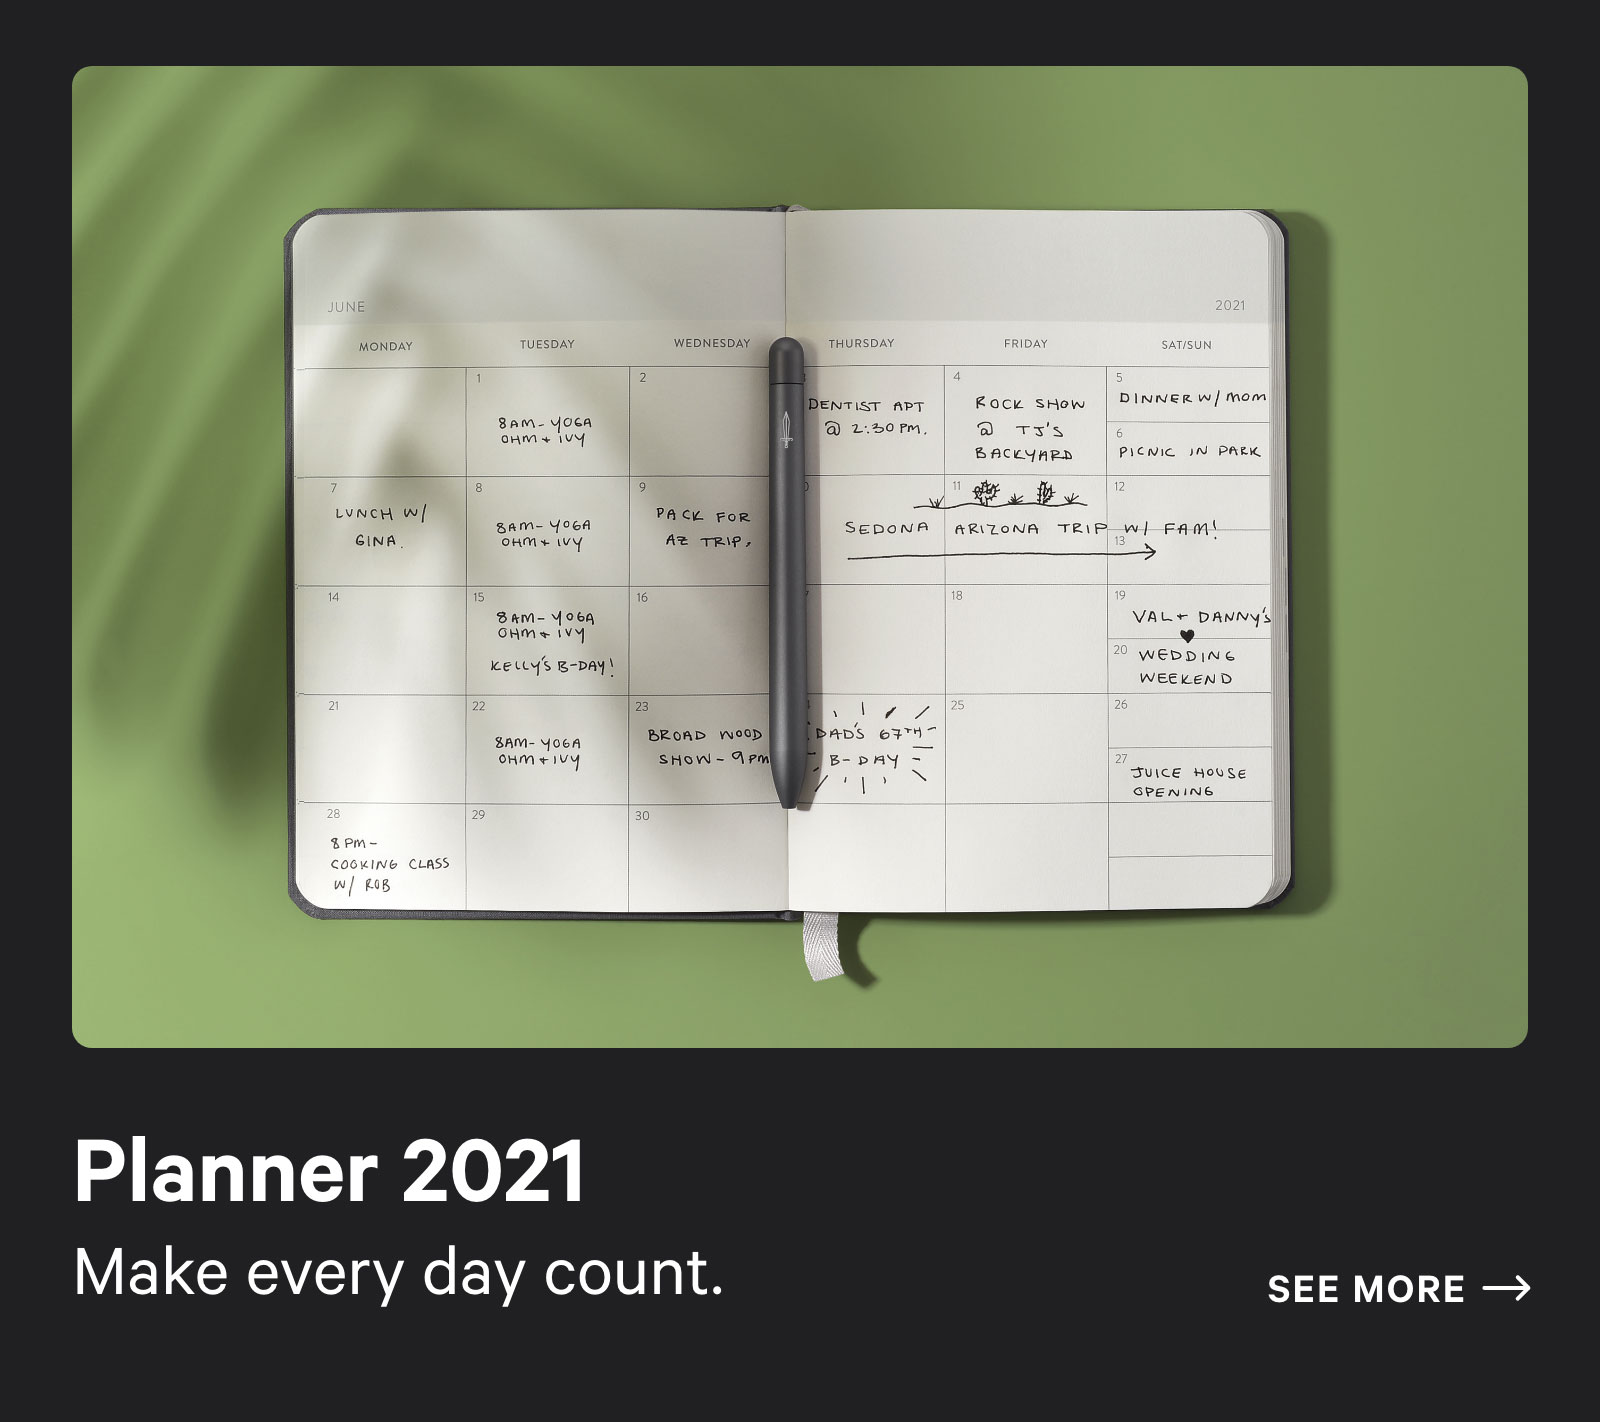 Planner 2021. Make every day count. See more ?